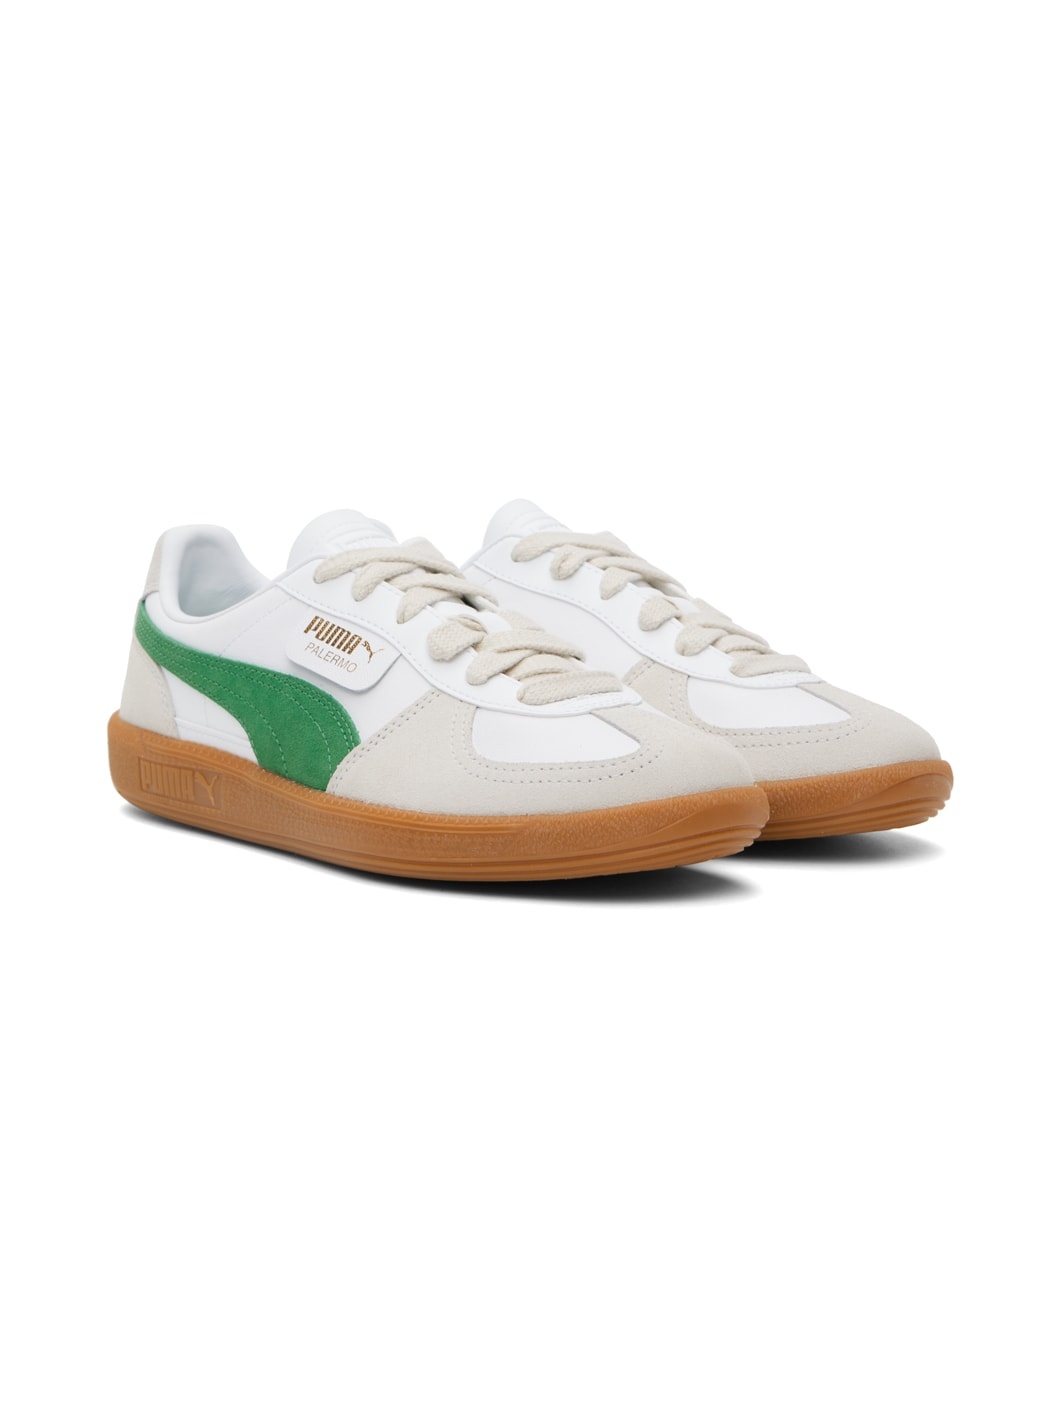 Off-White & Green Palermo Leather Sneakers - 4